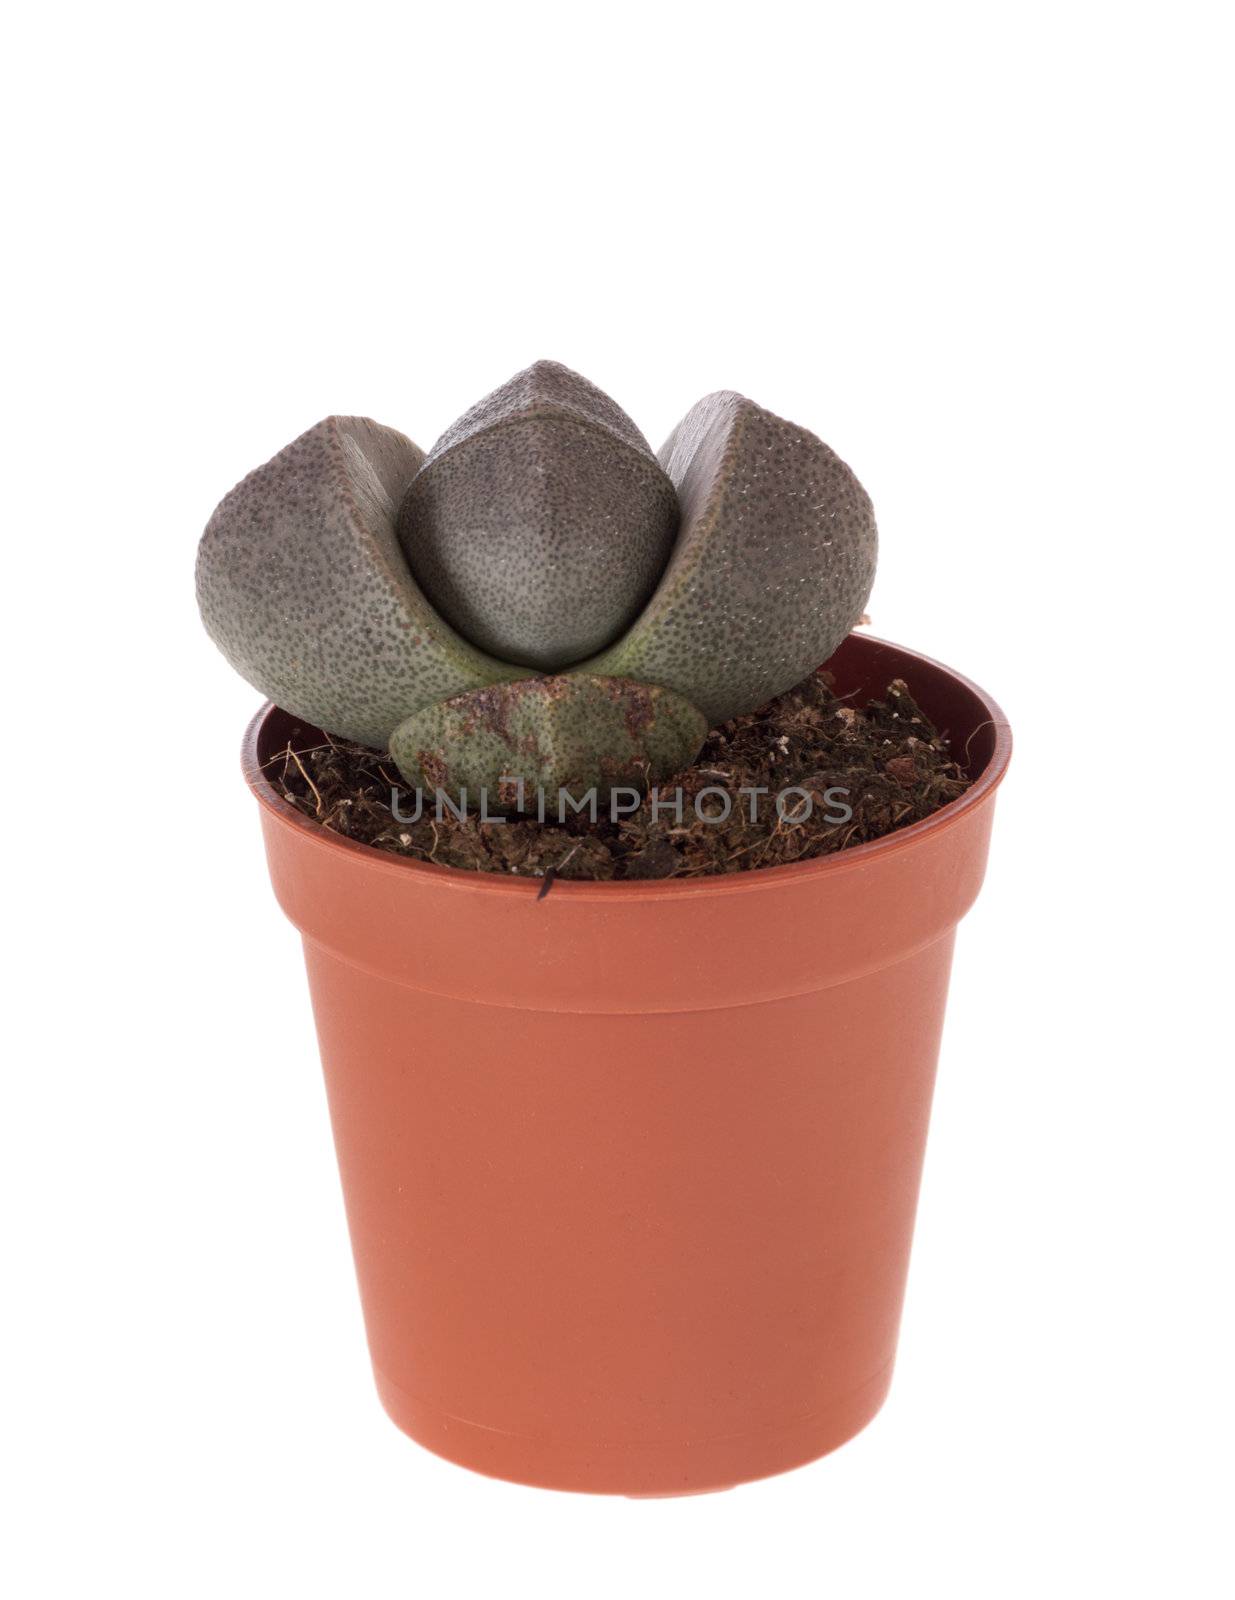 Lithops by aguirre_mar